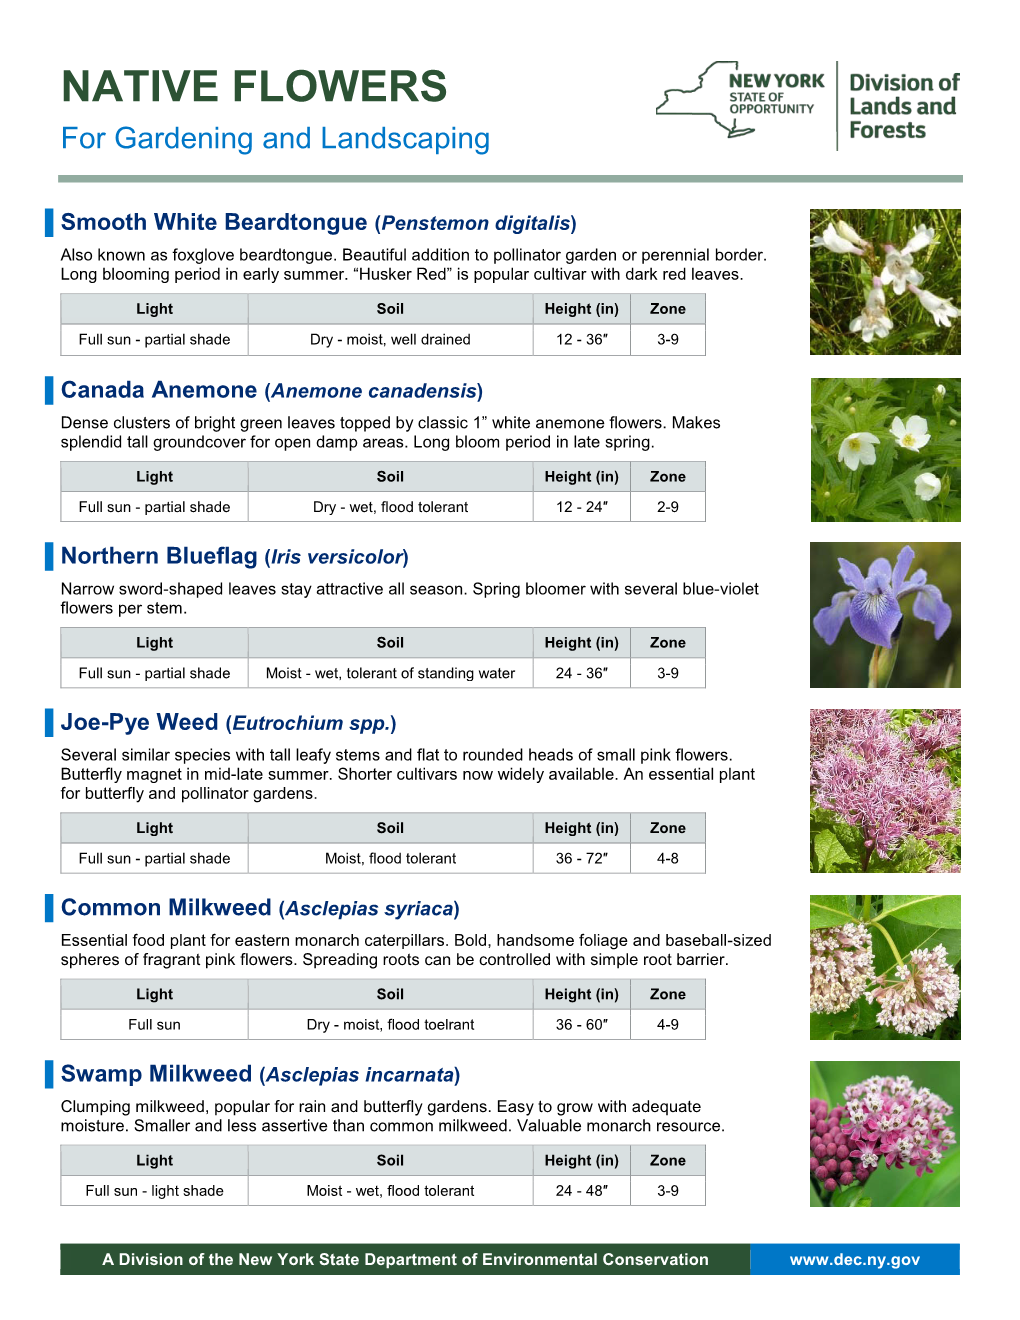 Native Plants for Gardening and Landscaping